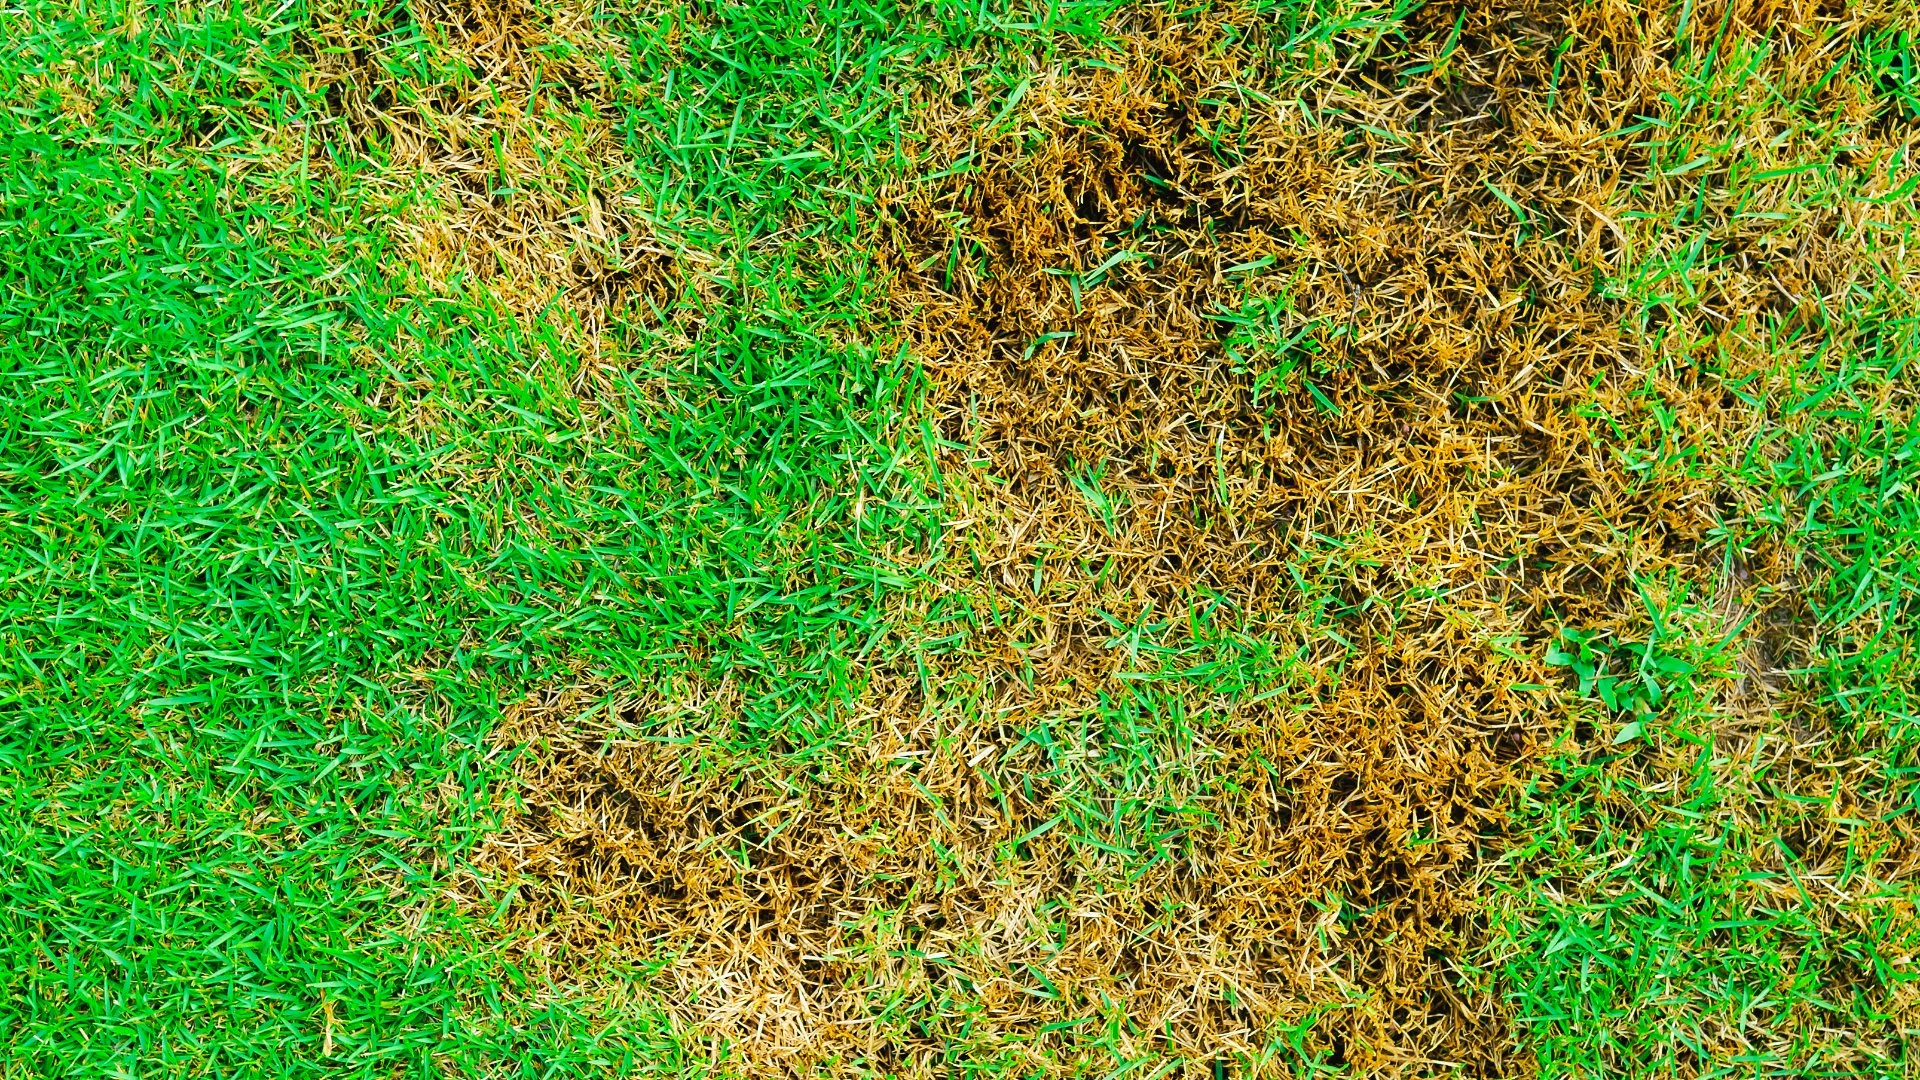 4 Lawn Diseases That Can Invade Lawns in Fishers, IN